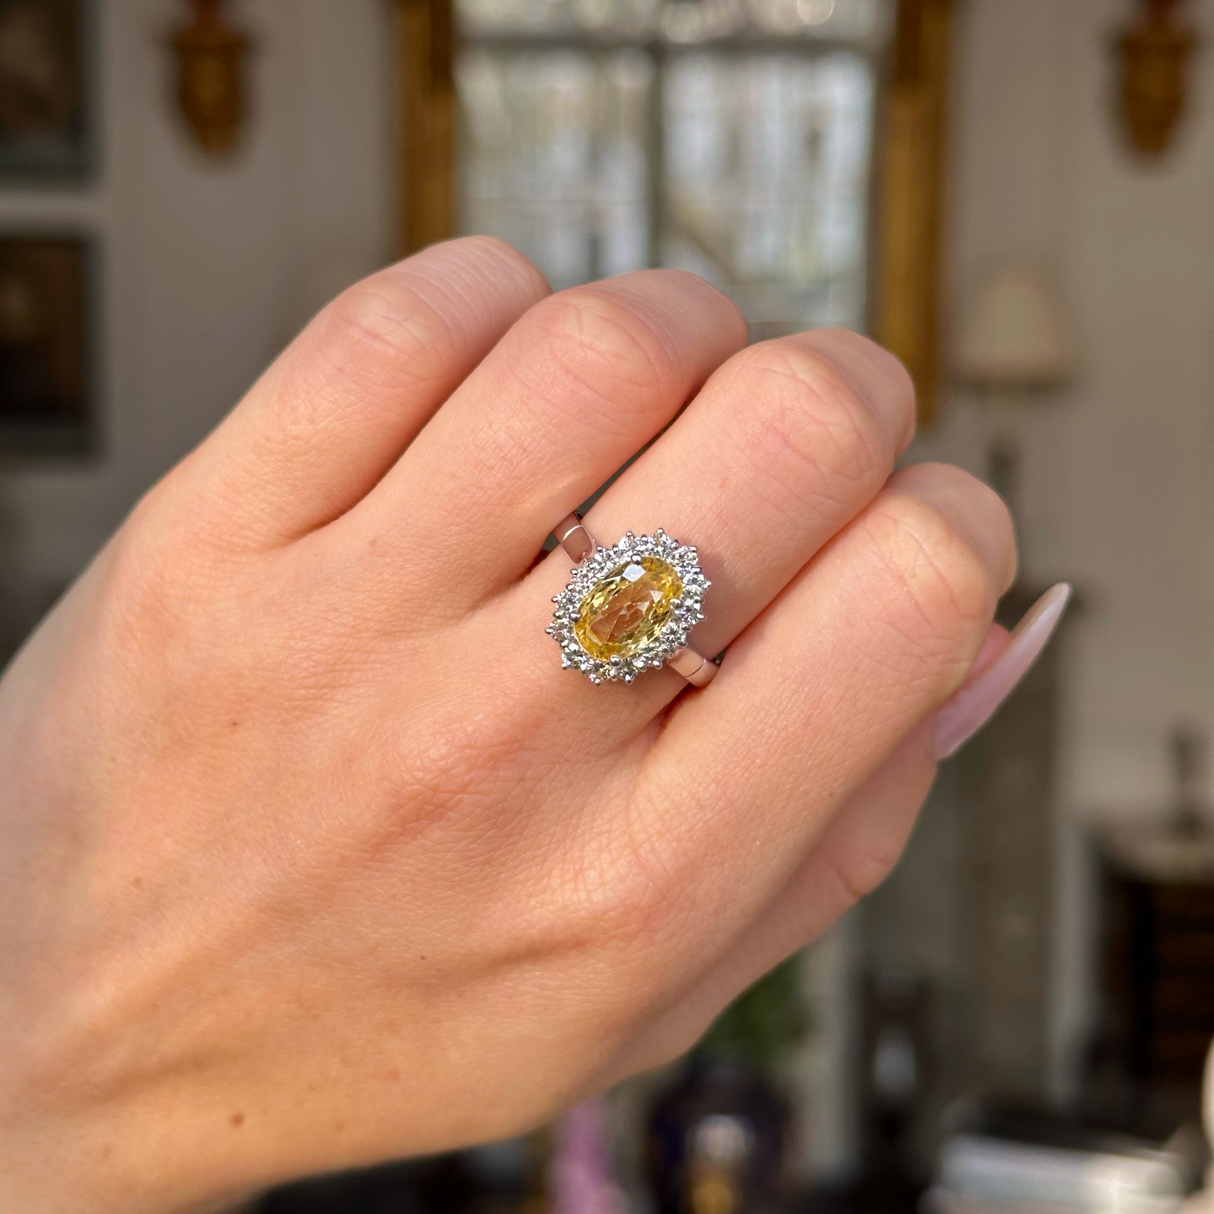 Vintage 3ct yellow sapphire & diamond cluster engagement ring, 18ct white gold